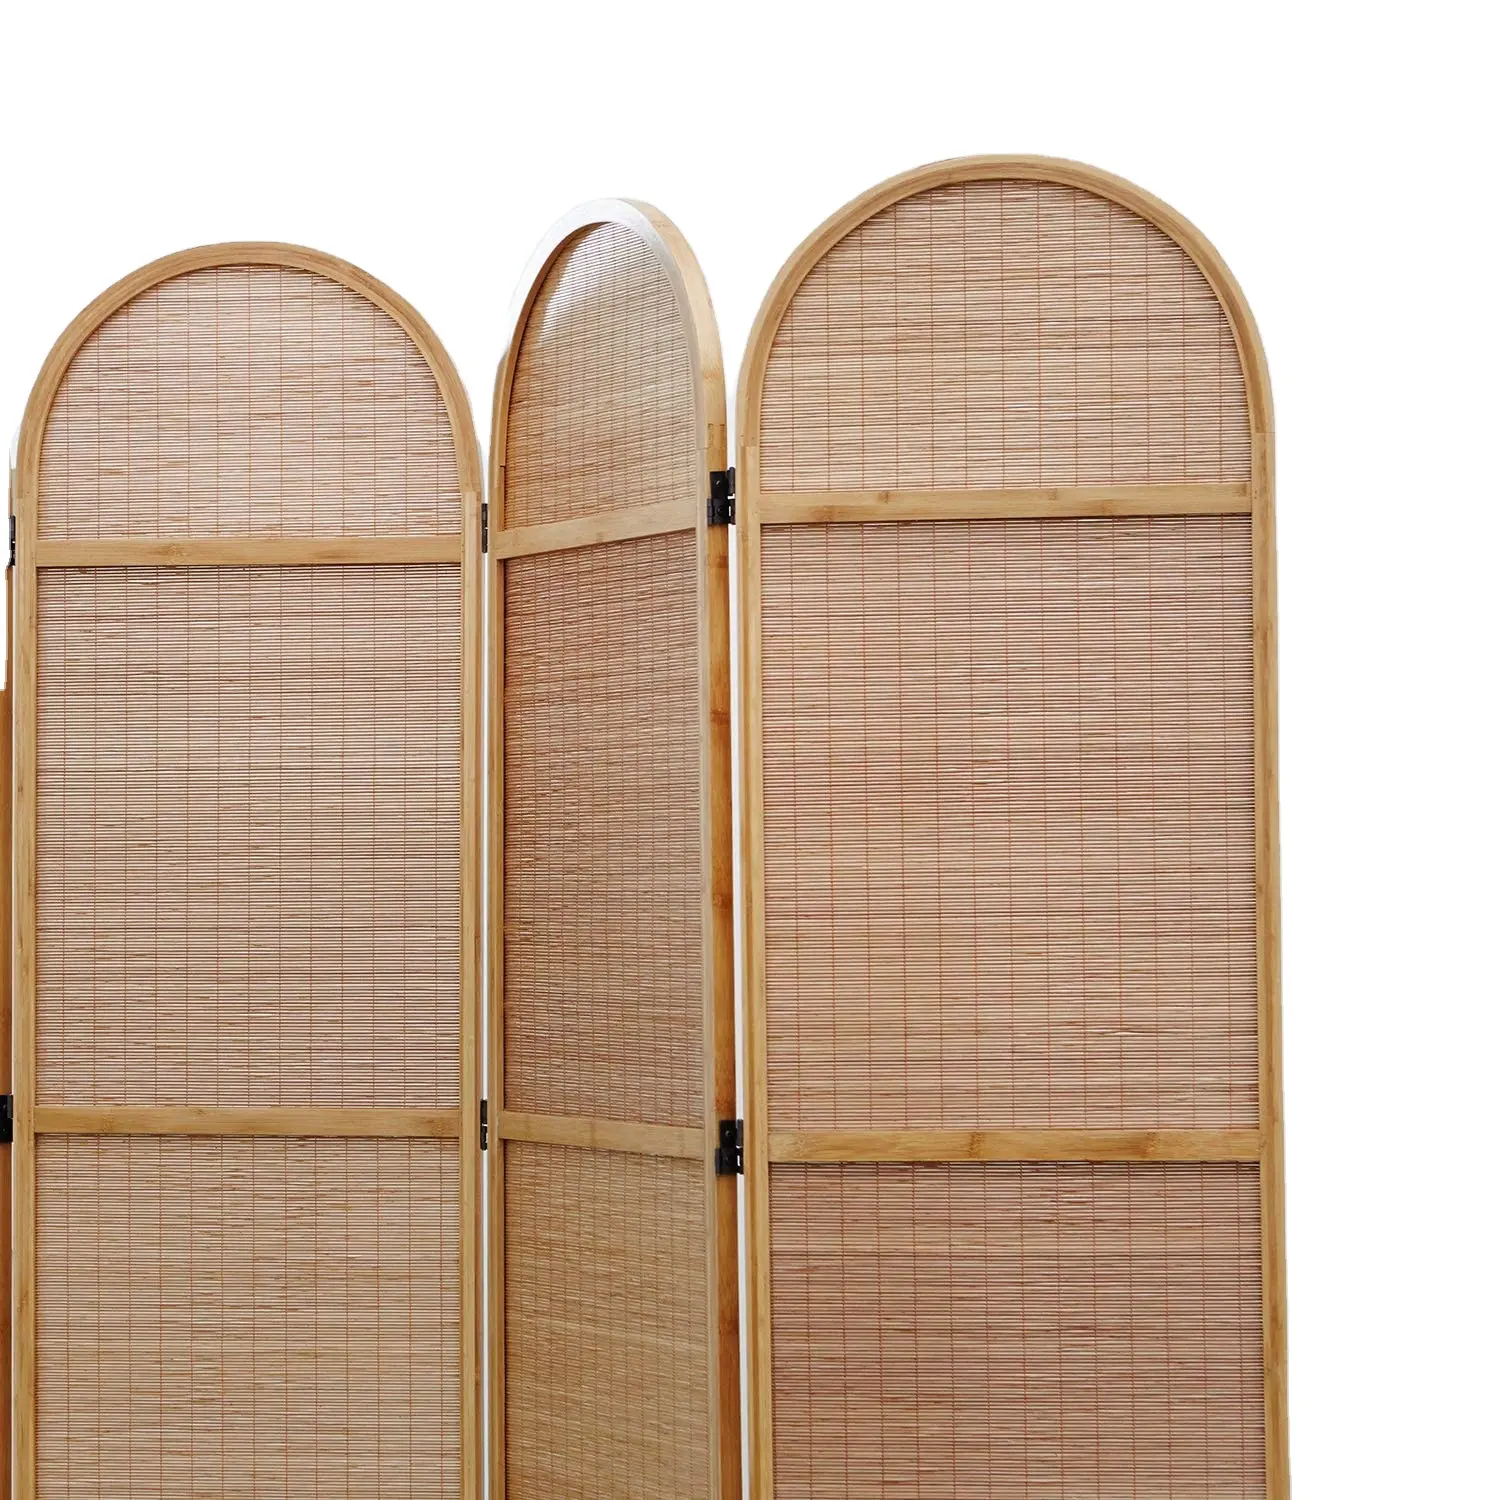 GREAT 2021 New Product 4 Panel Folding Bamboo Decorative Separation Wall Divider